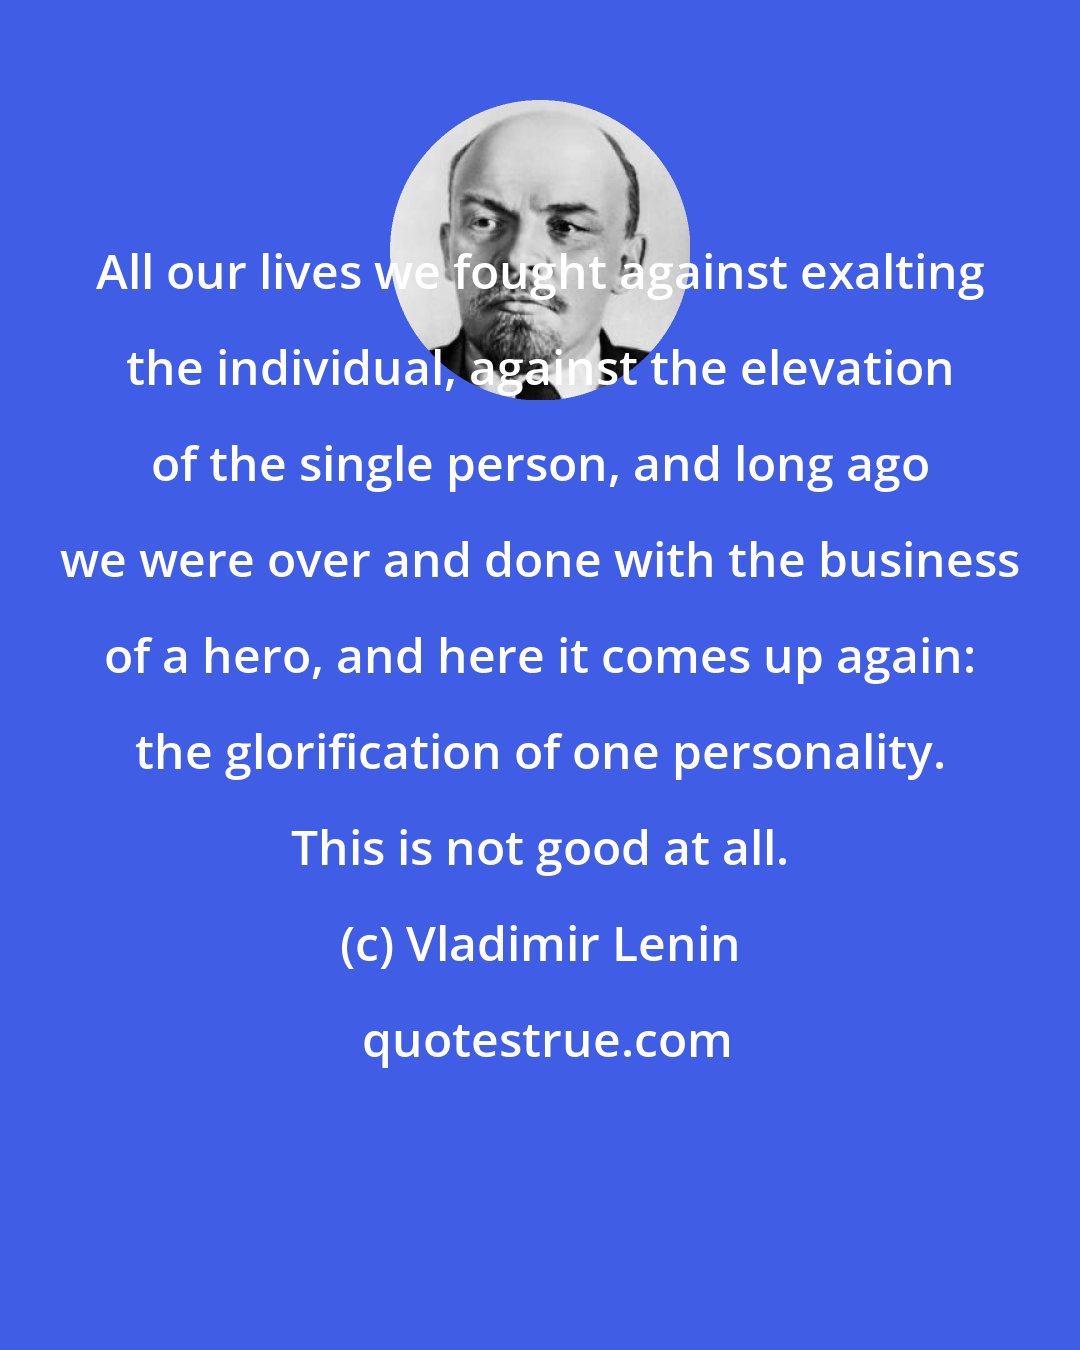 Vladimir Lenin: All our lives we fought against exalting the individual, against the elevation of the single person, and long ago we were over and done with the business of a hero, and here it comes up again: the glorification of one personality. This is not good at all.